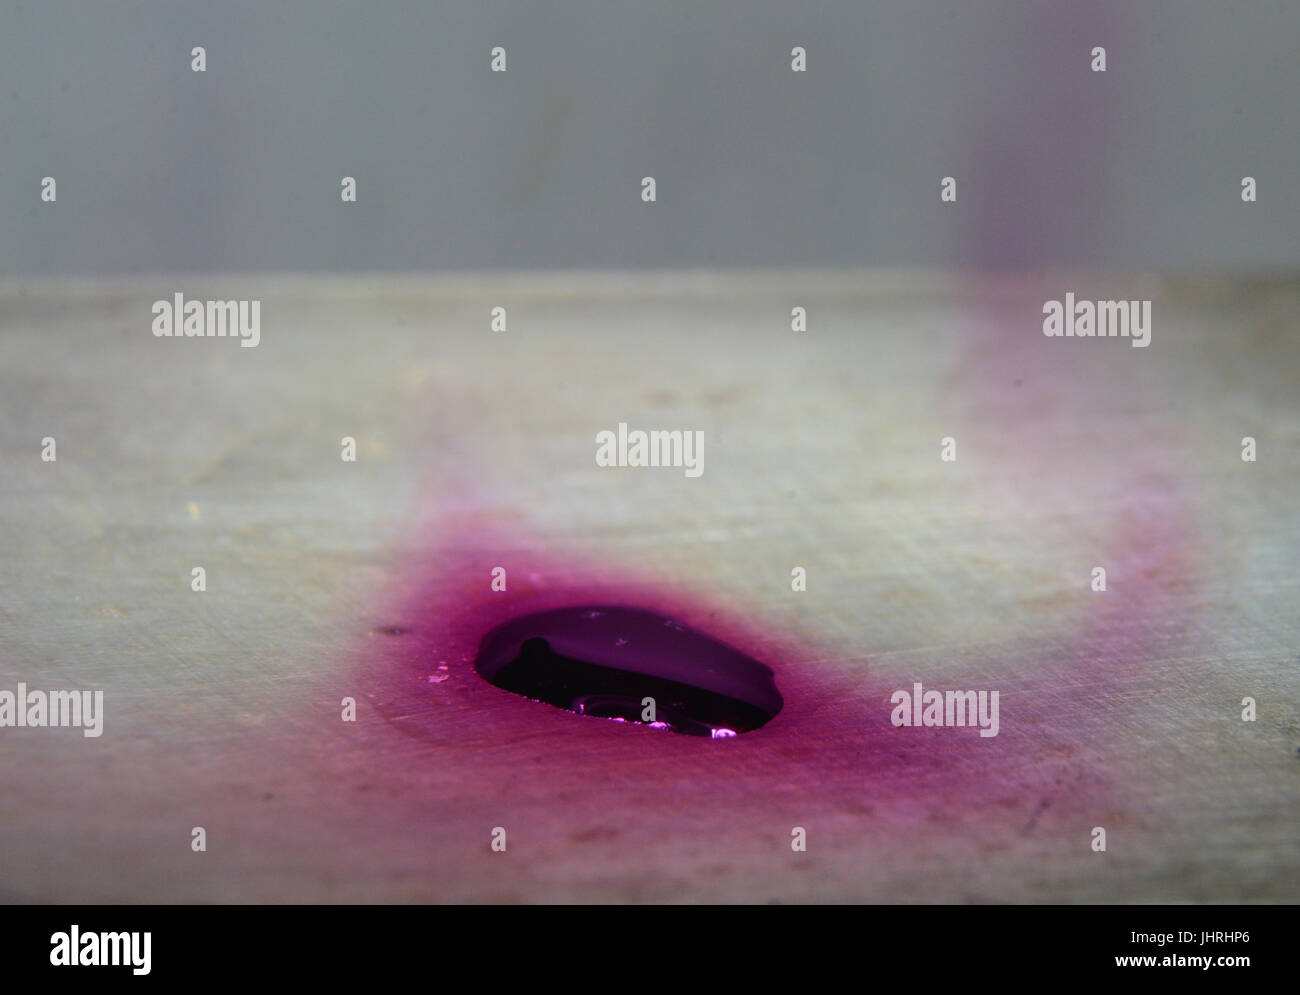 https://c8.alamy.com/comp/JHRHP6/iodine-evaporates-on-a-hot-plate-causing-ghostly-violet-vapors-to-JHRHP6.jpg